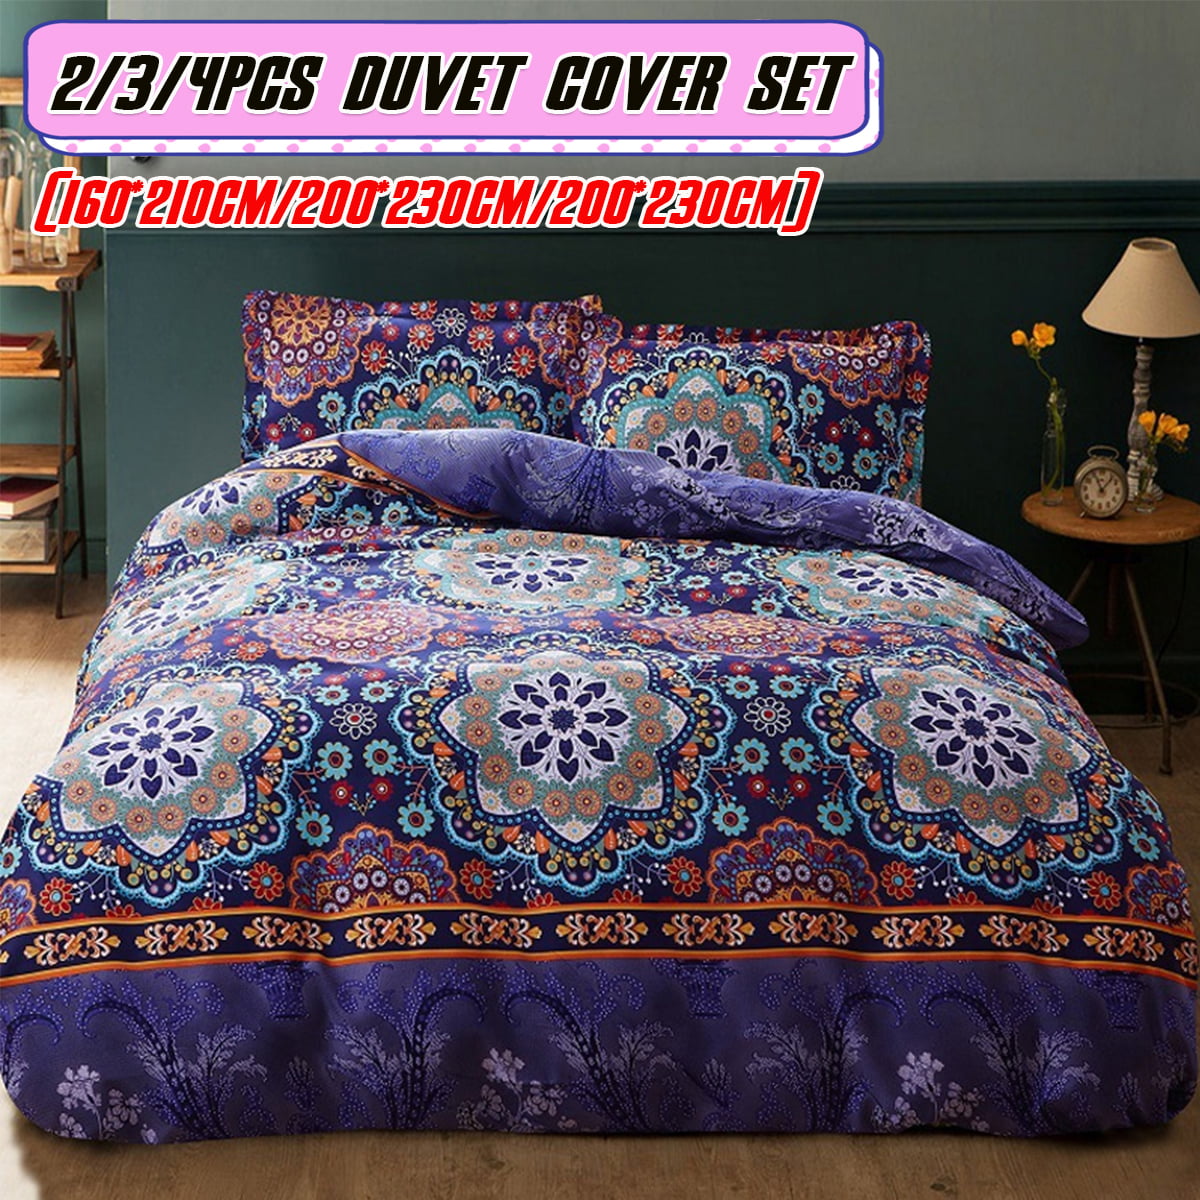 Indian Bedspread Queen Camel Indian Embroidered Bedspread Bedding Bed Cover